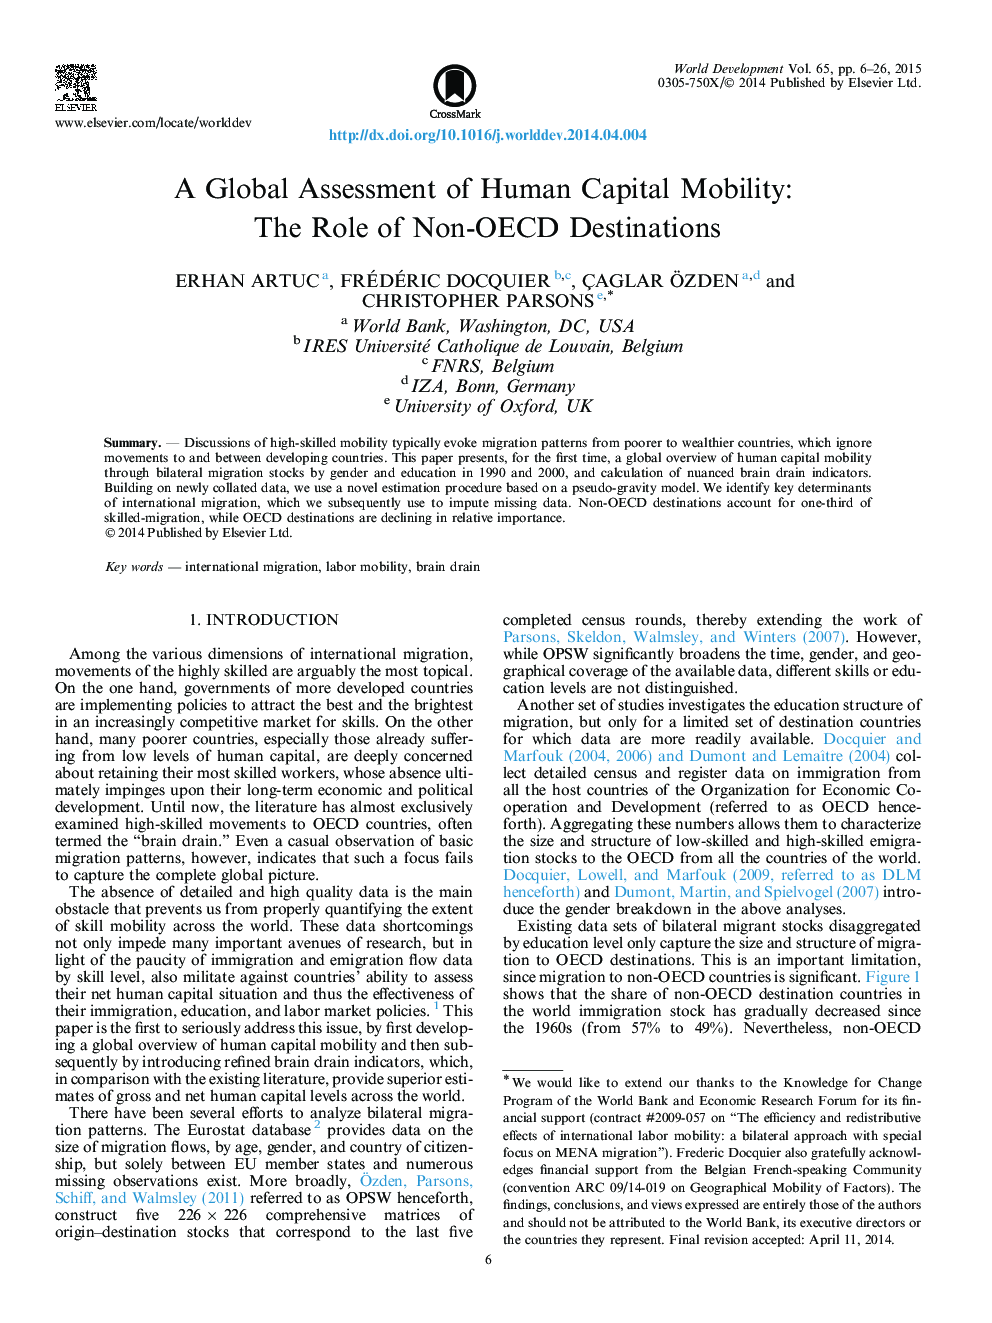 A Global Assessment of Human Capital Mobility: The Role of Non-OECD Destinations